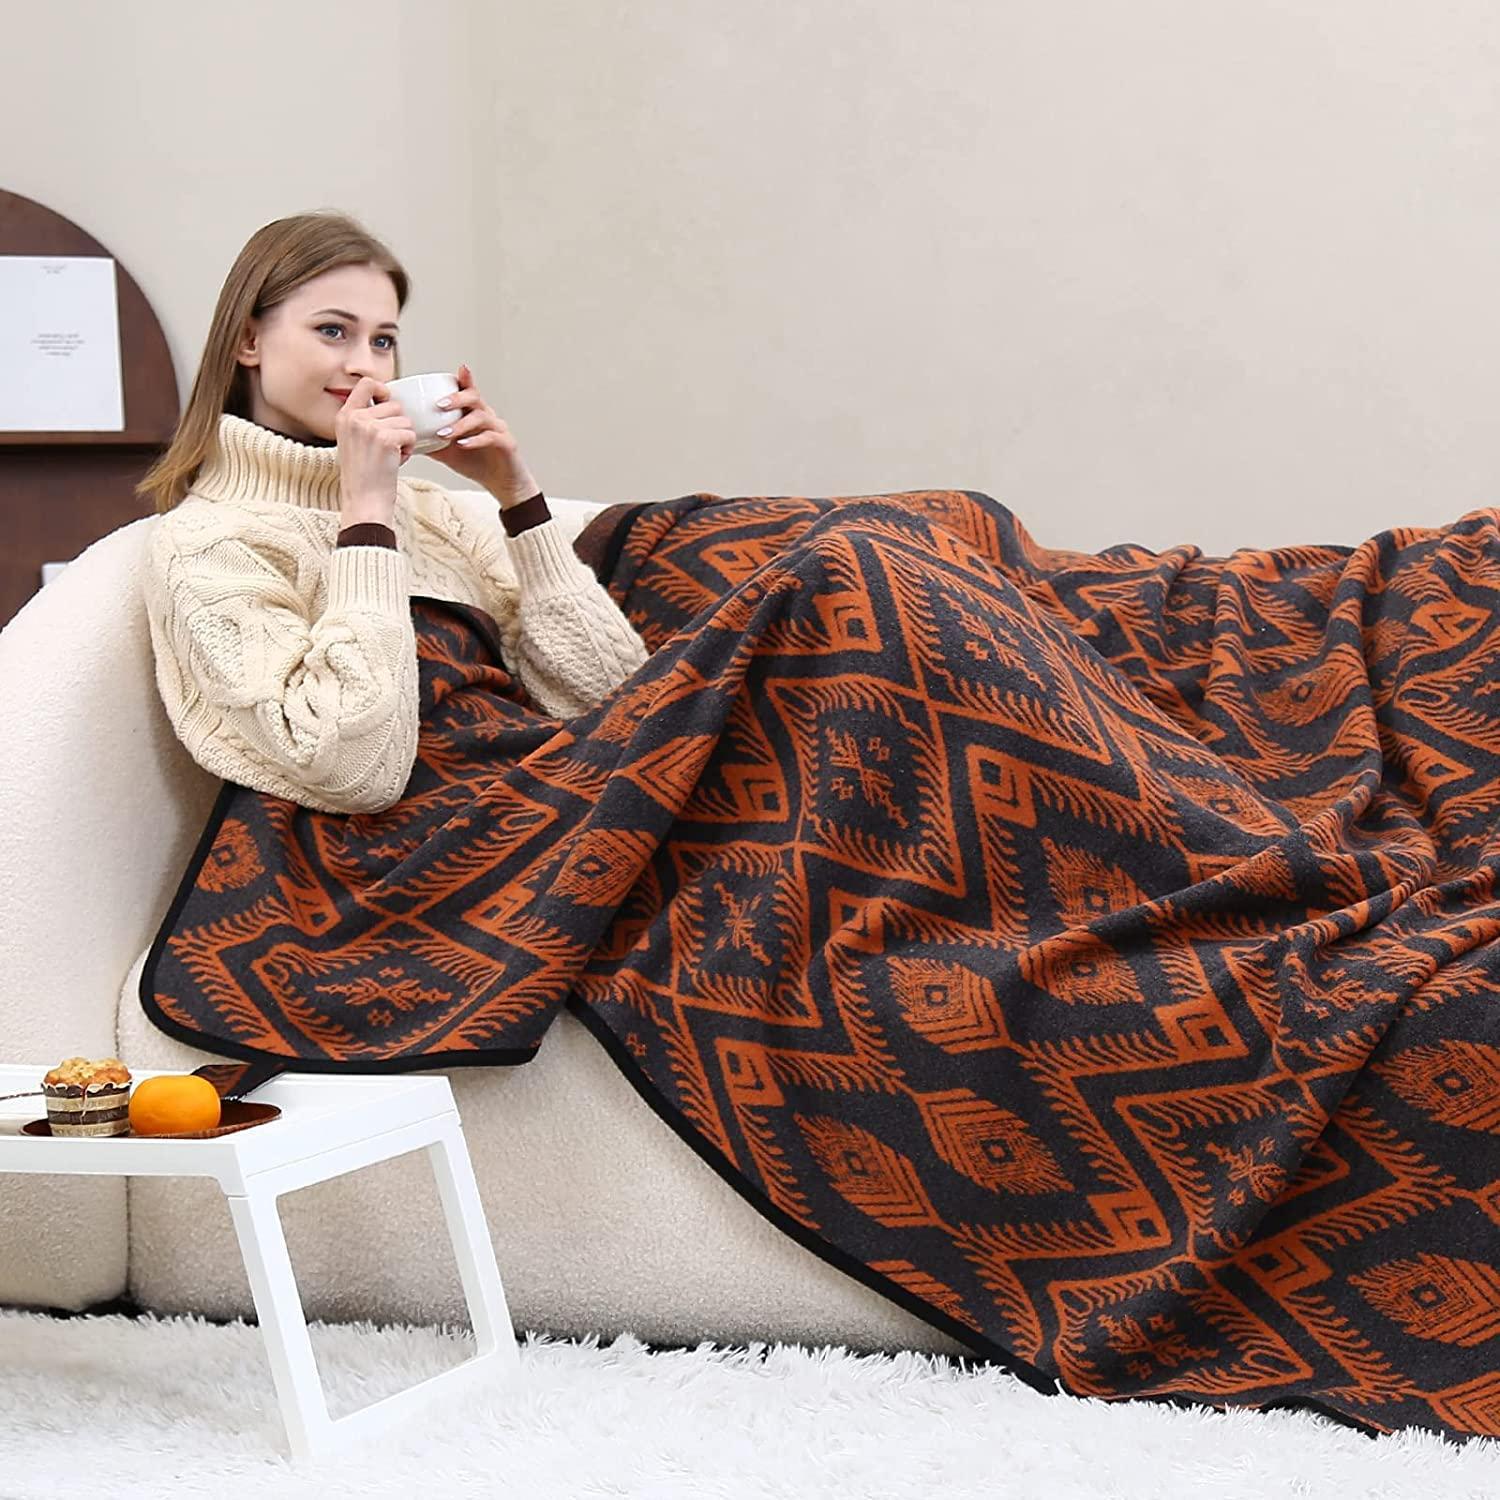 ACUSHLA Merino Wool Thorw Blanket - Warm, Thick, Washable, Large Throw - Great for Indoor Outdoor Camping (160 x 200 cm, Bohemia Orange) 2